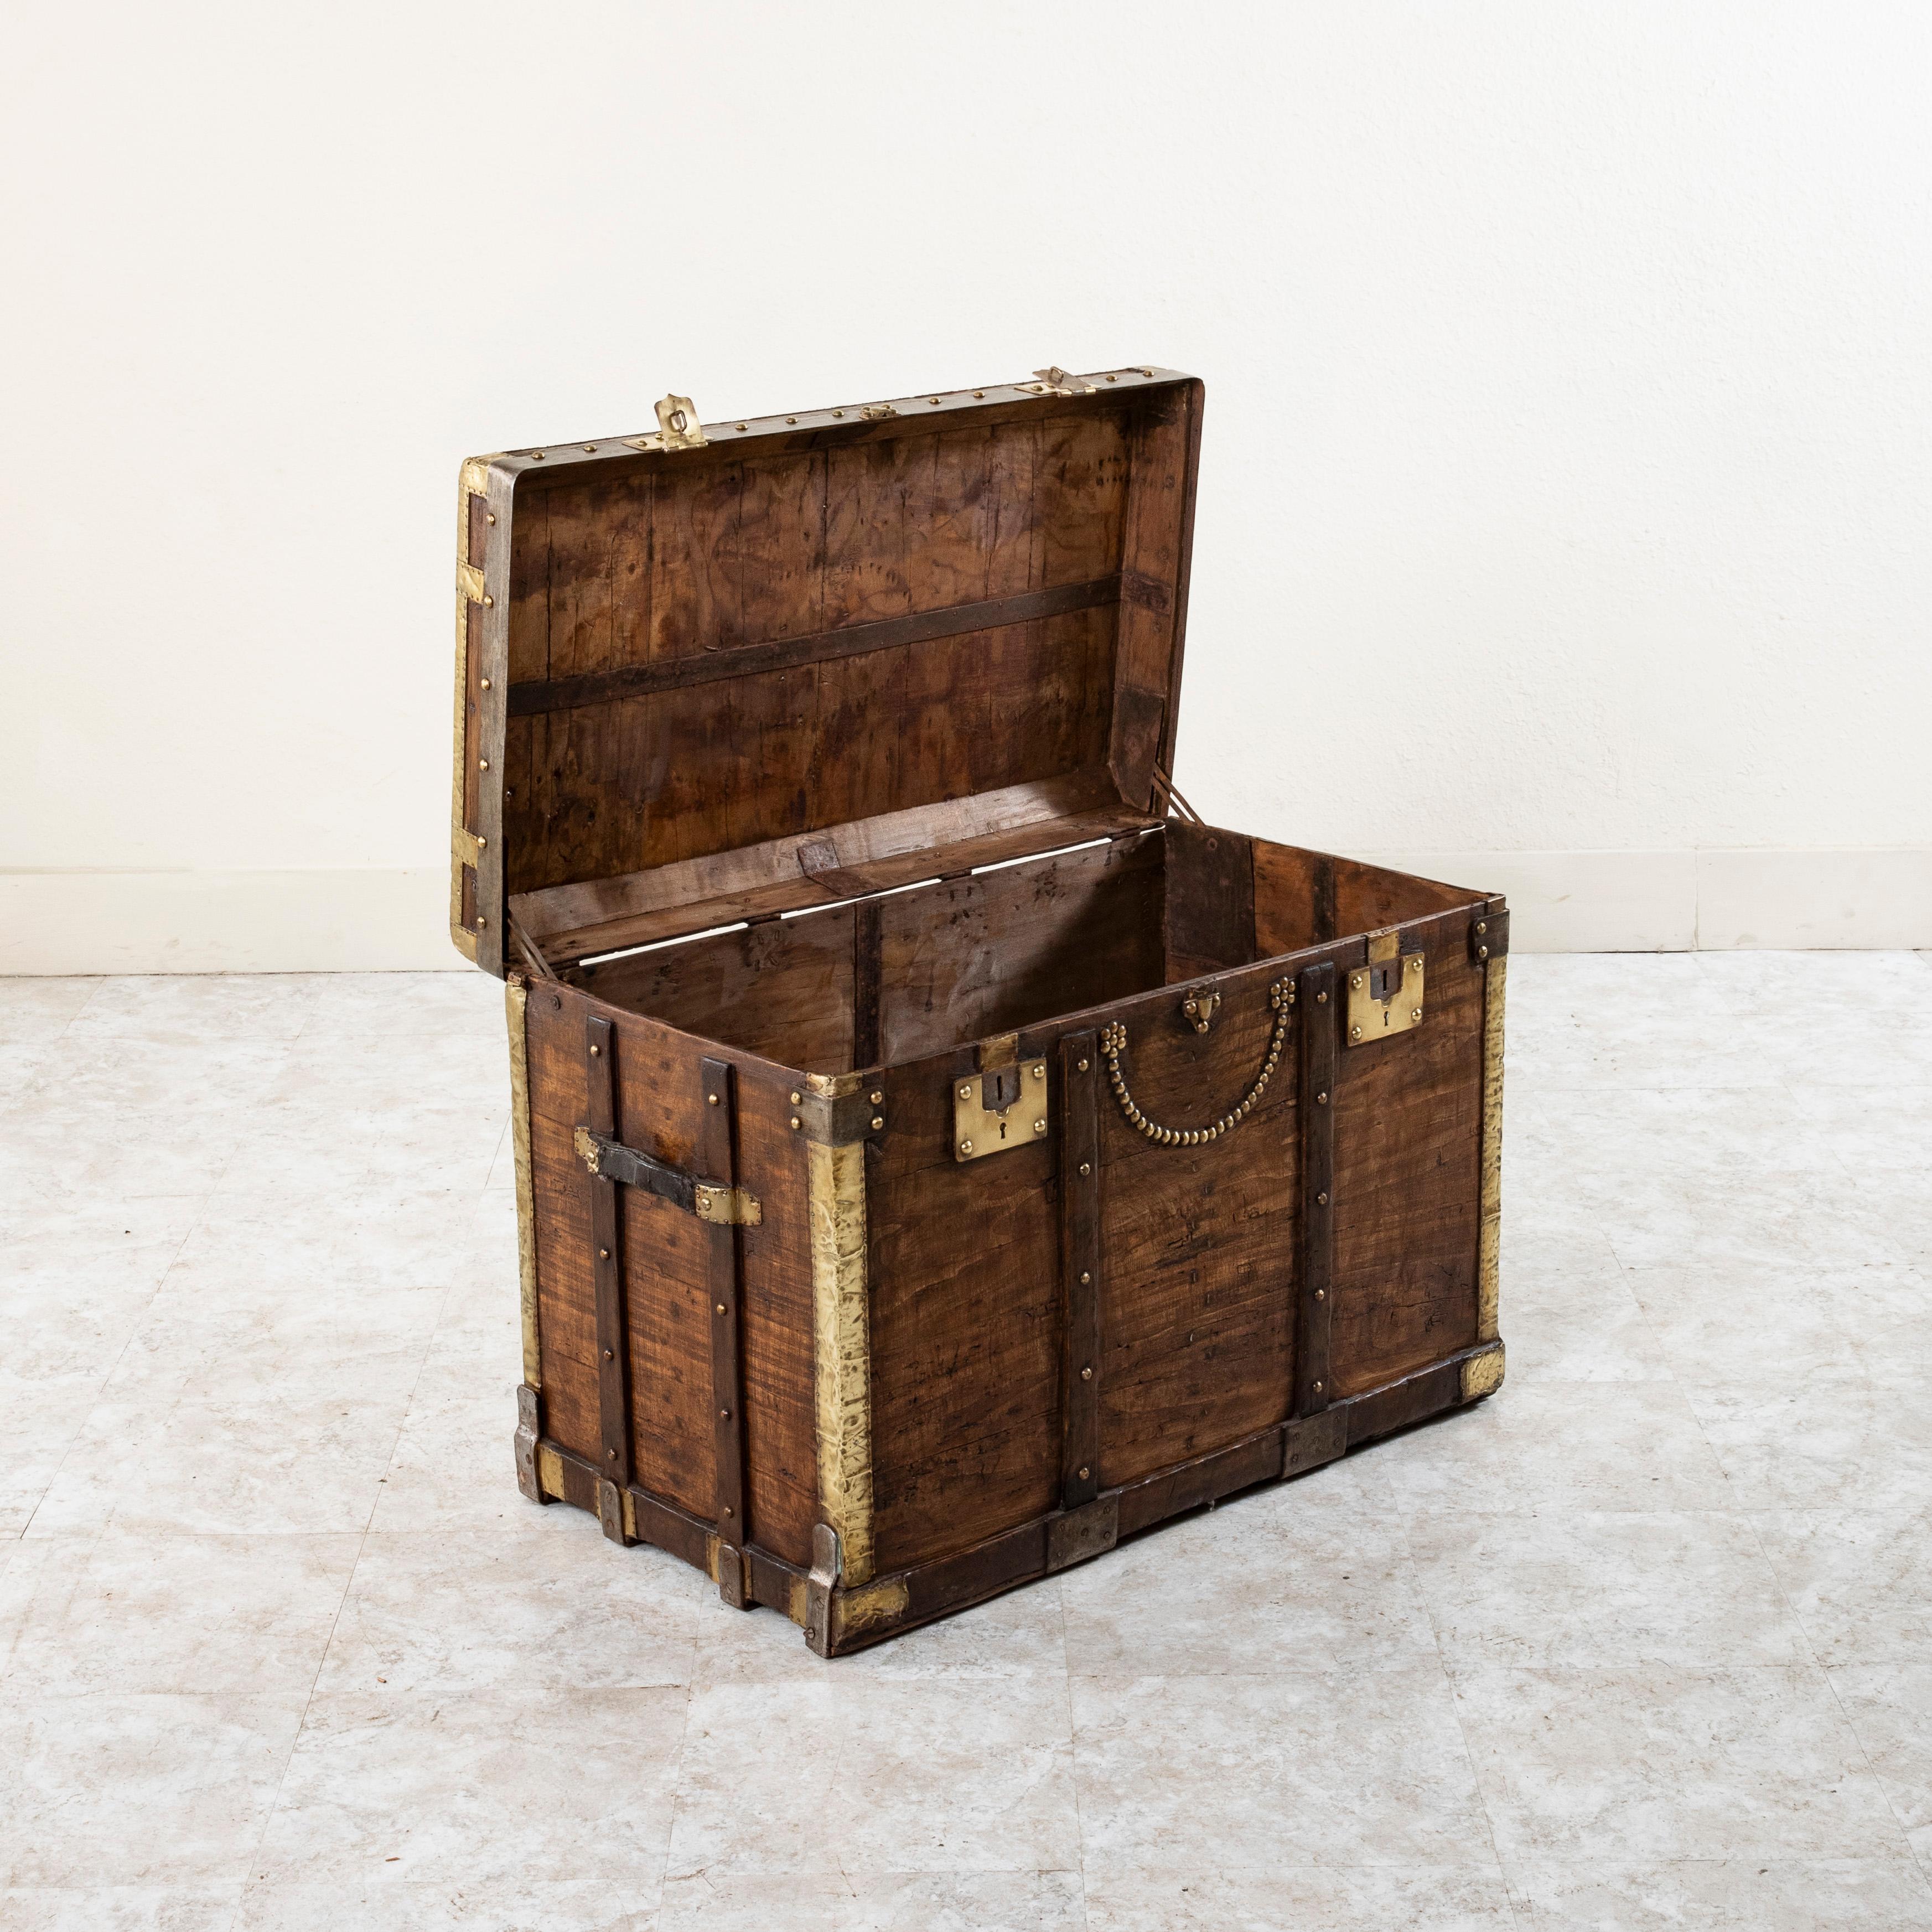 French Wooden Steam Trunk with Runners, Brass, Iron, Leather Details, circa 1880 For Sale 3